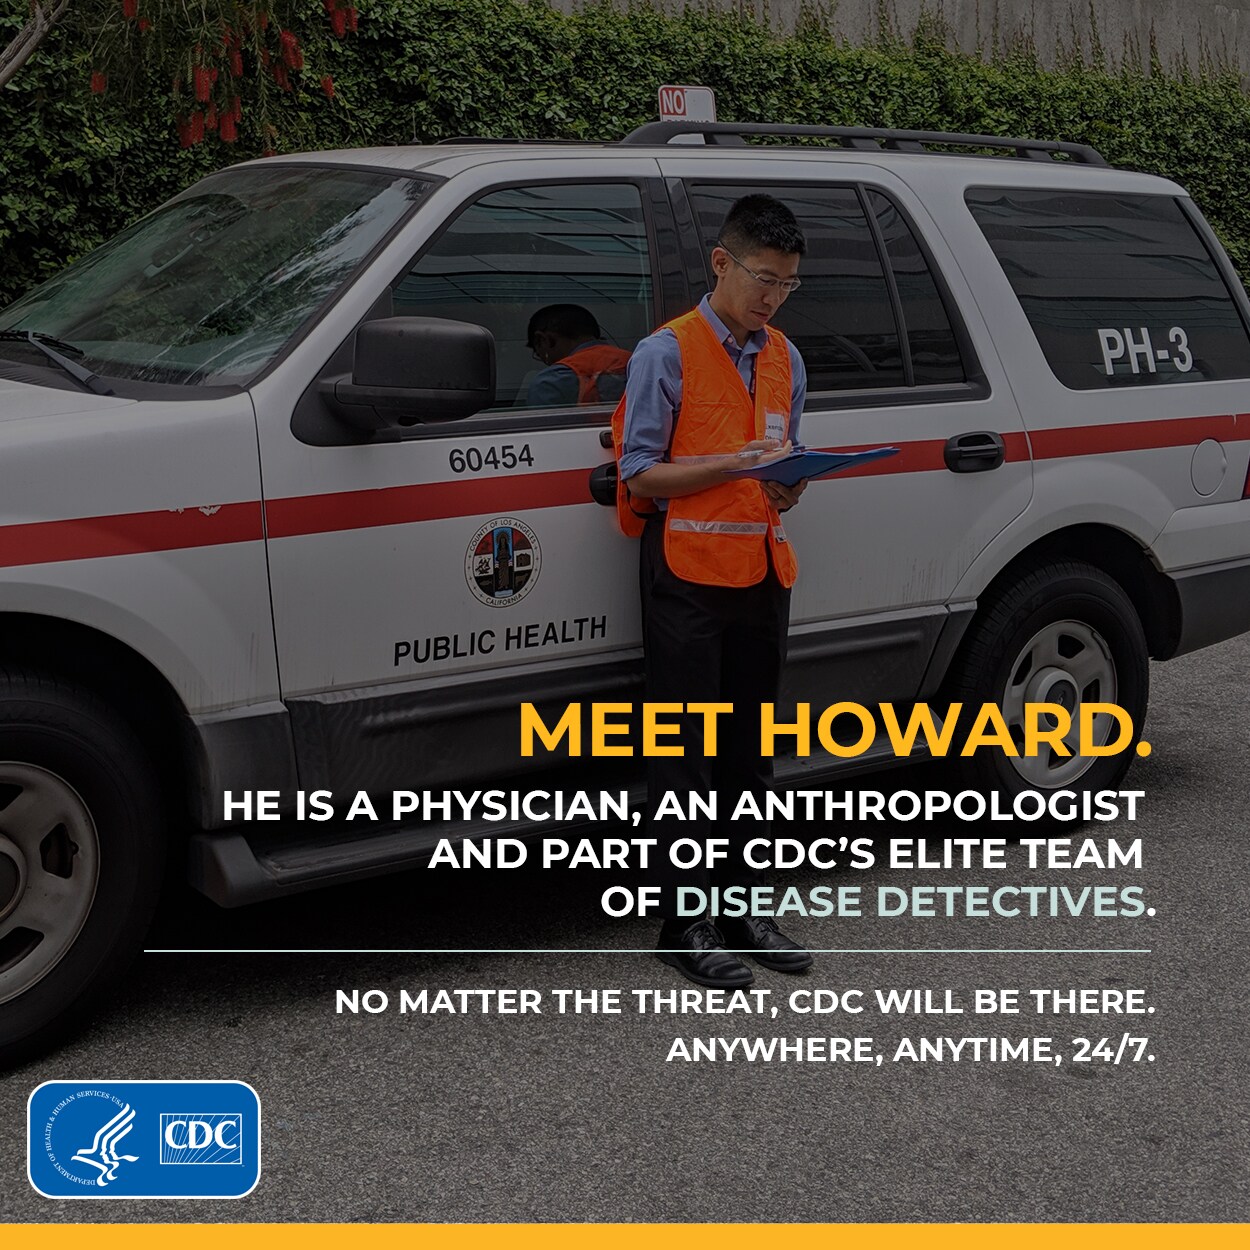 Meet Howard.  He is a physician, an anthropologist and part of CDC's elite team of disease detectives.